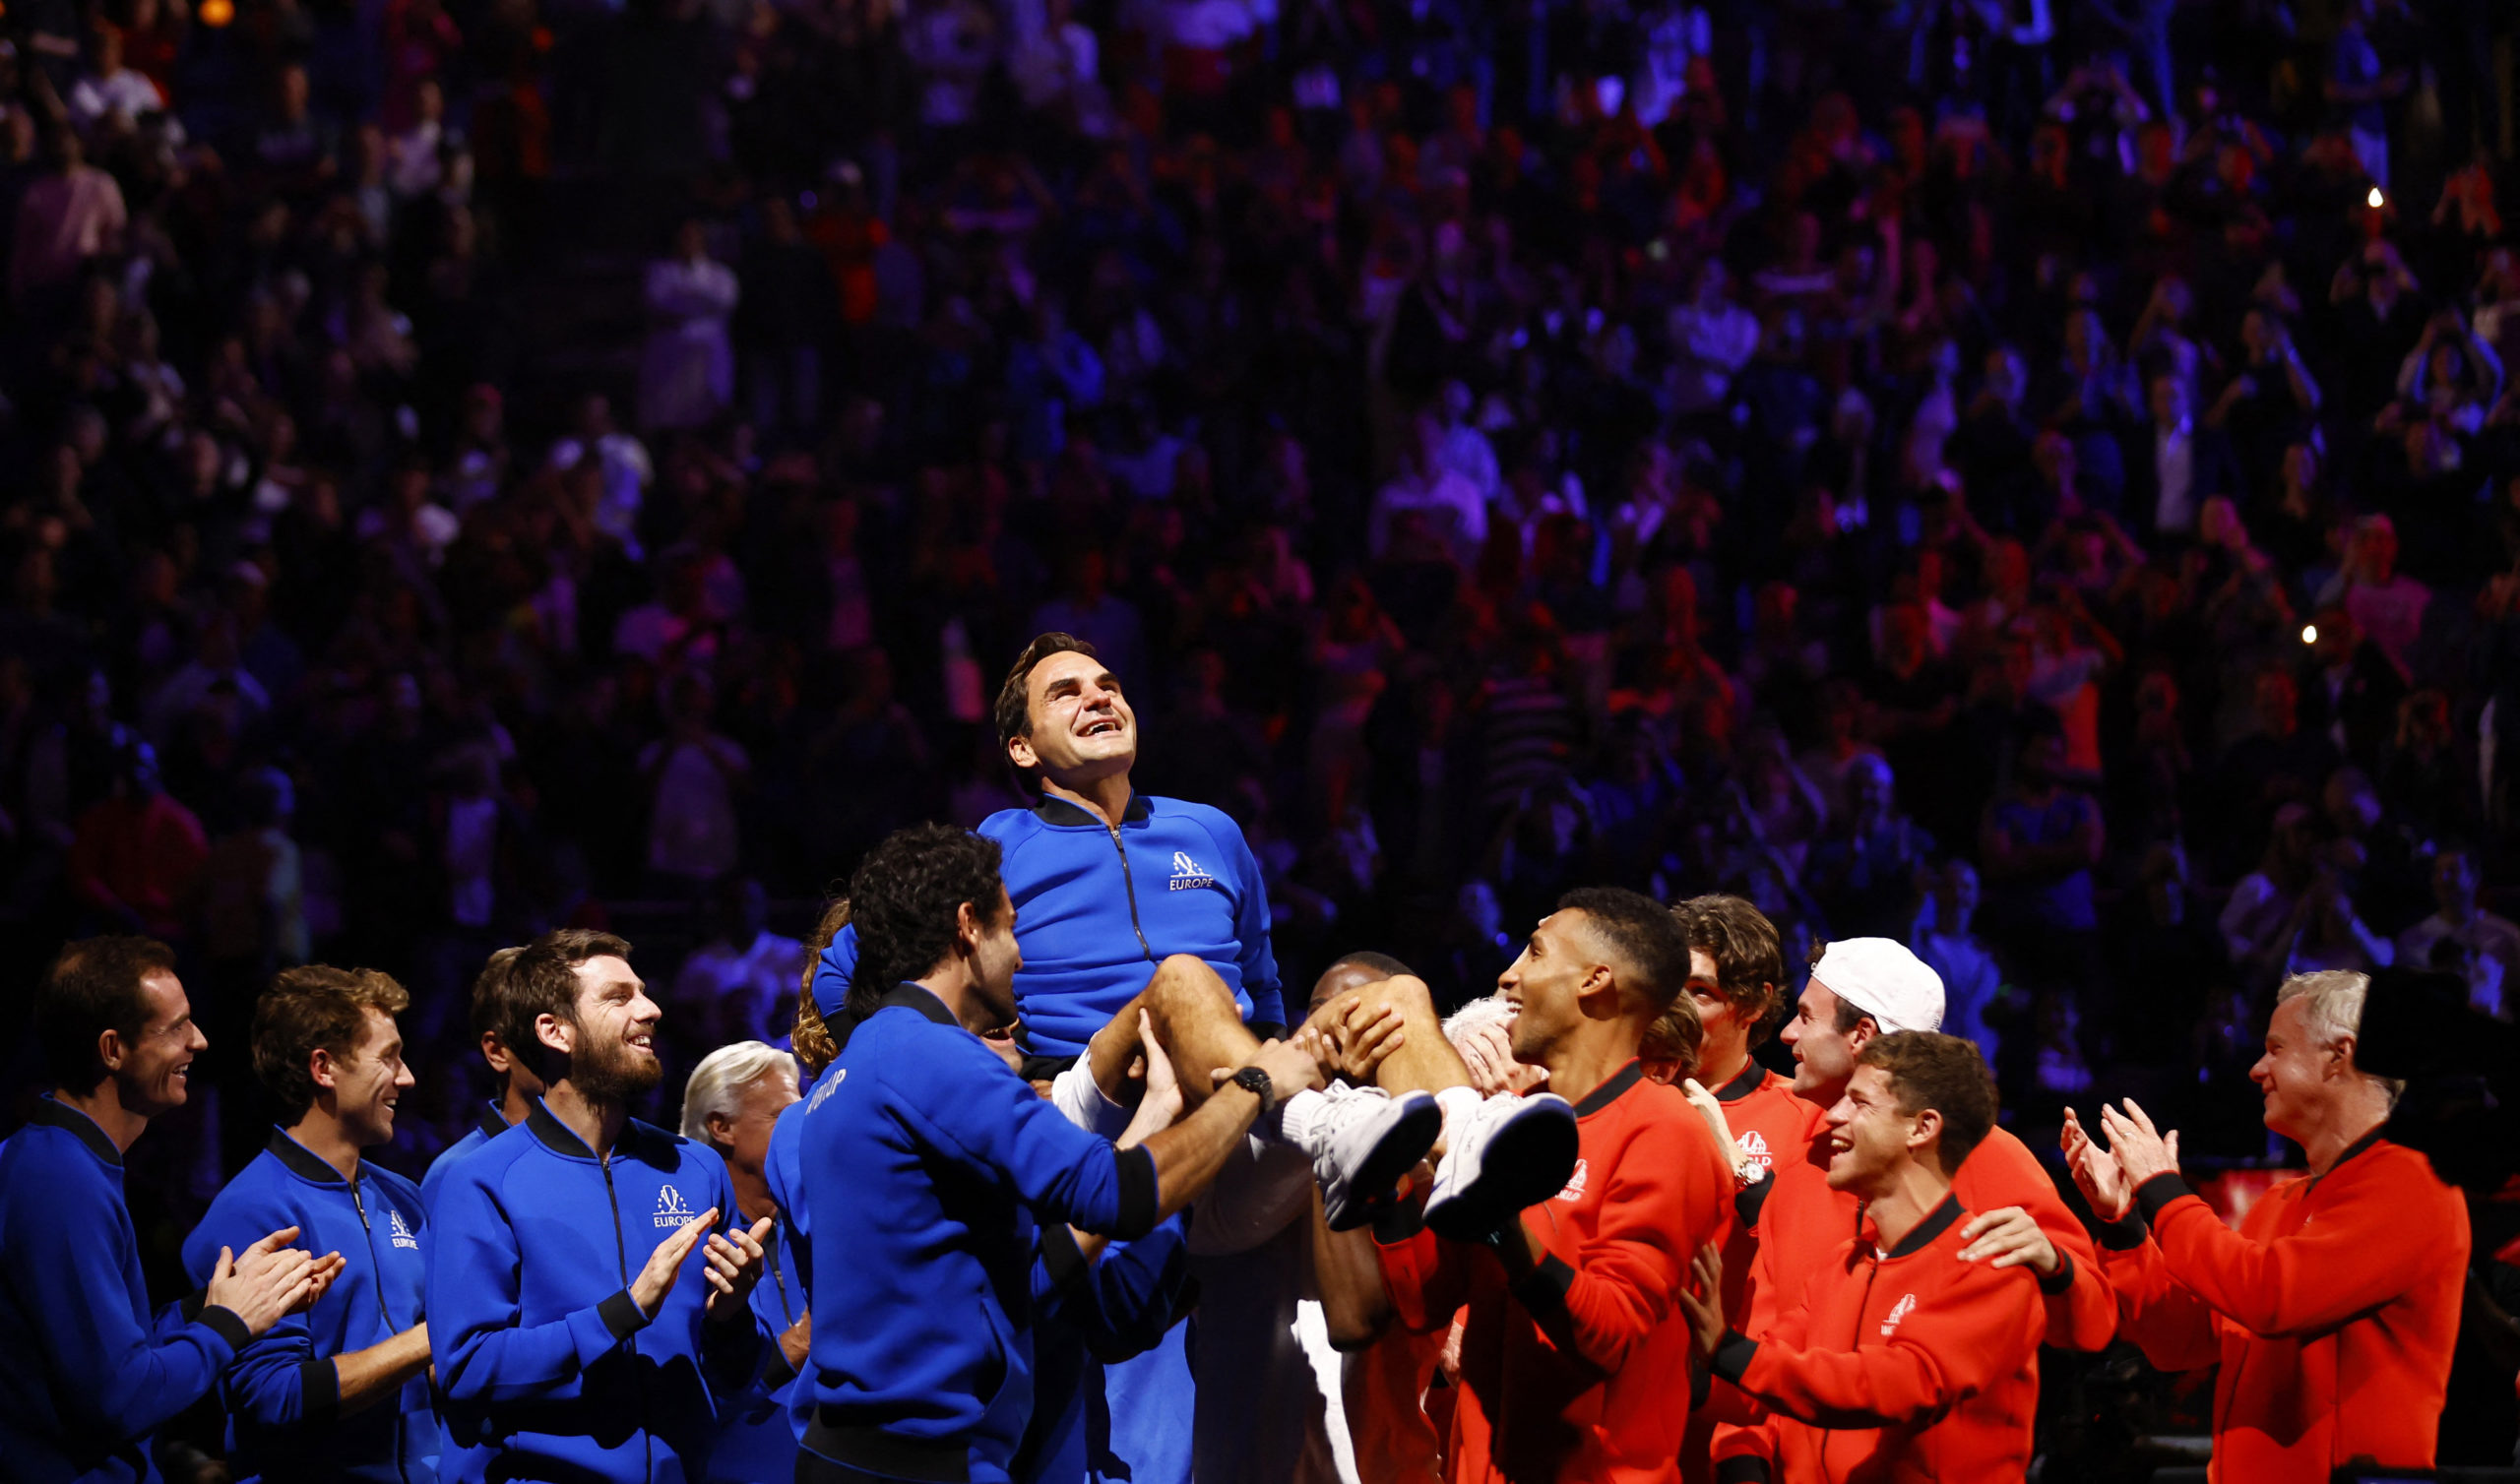 Team Europe and World members lift Roger Federer at the end of his last match after announcing his retirement 